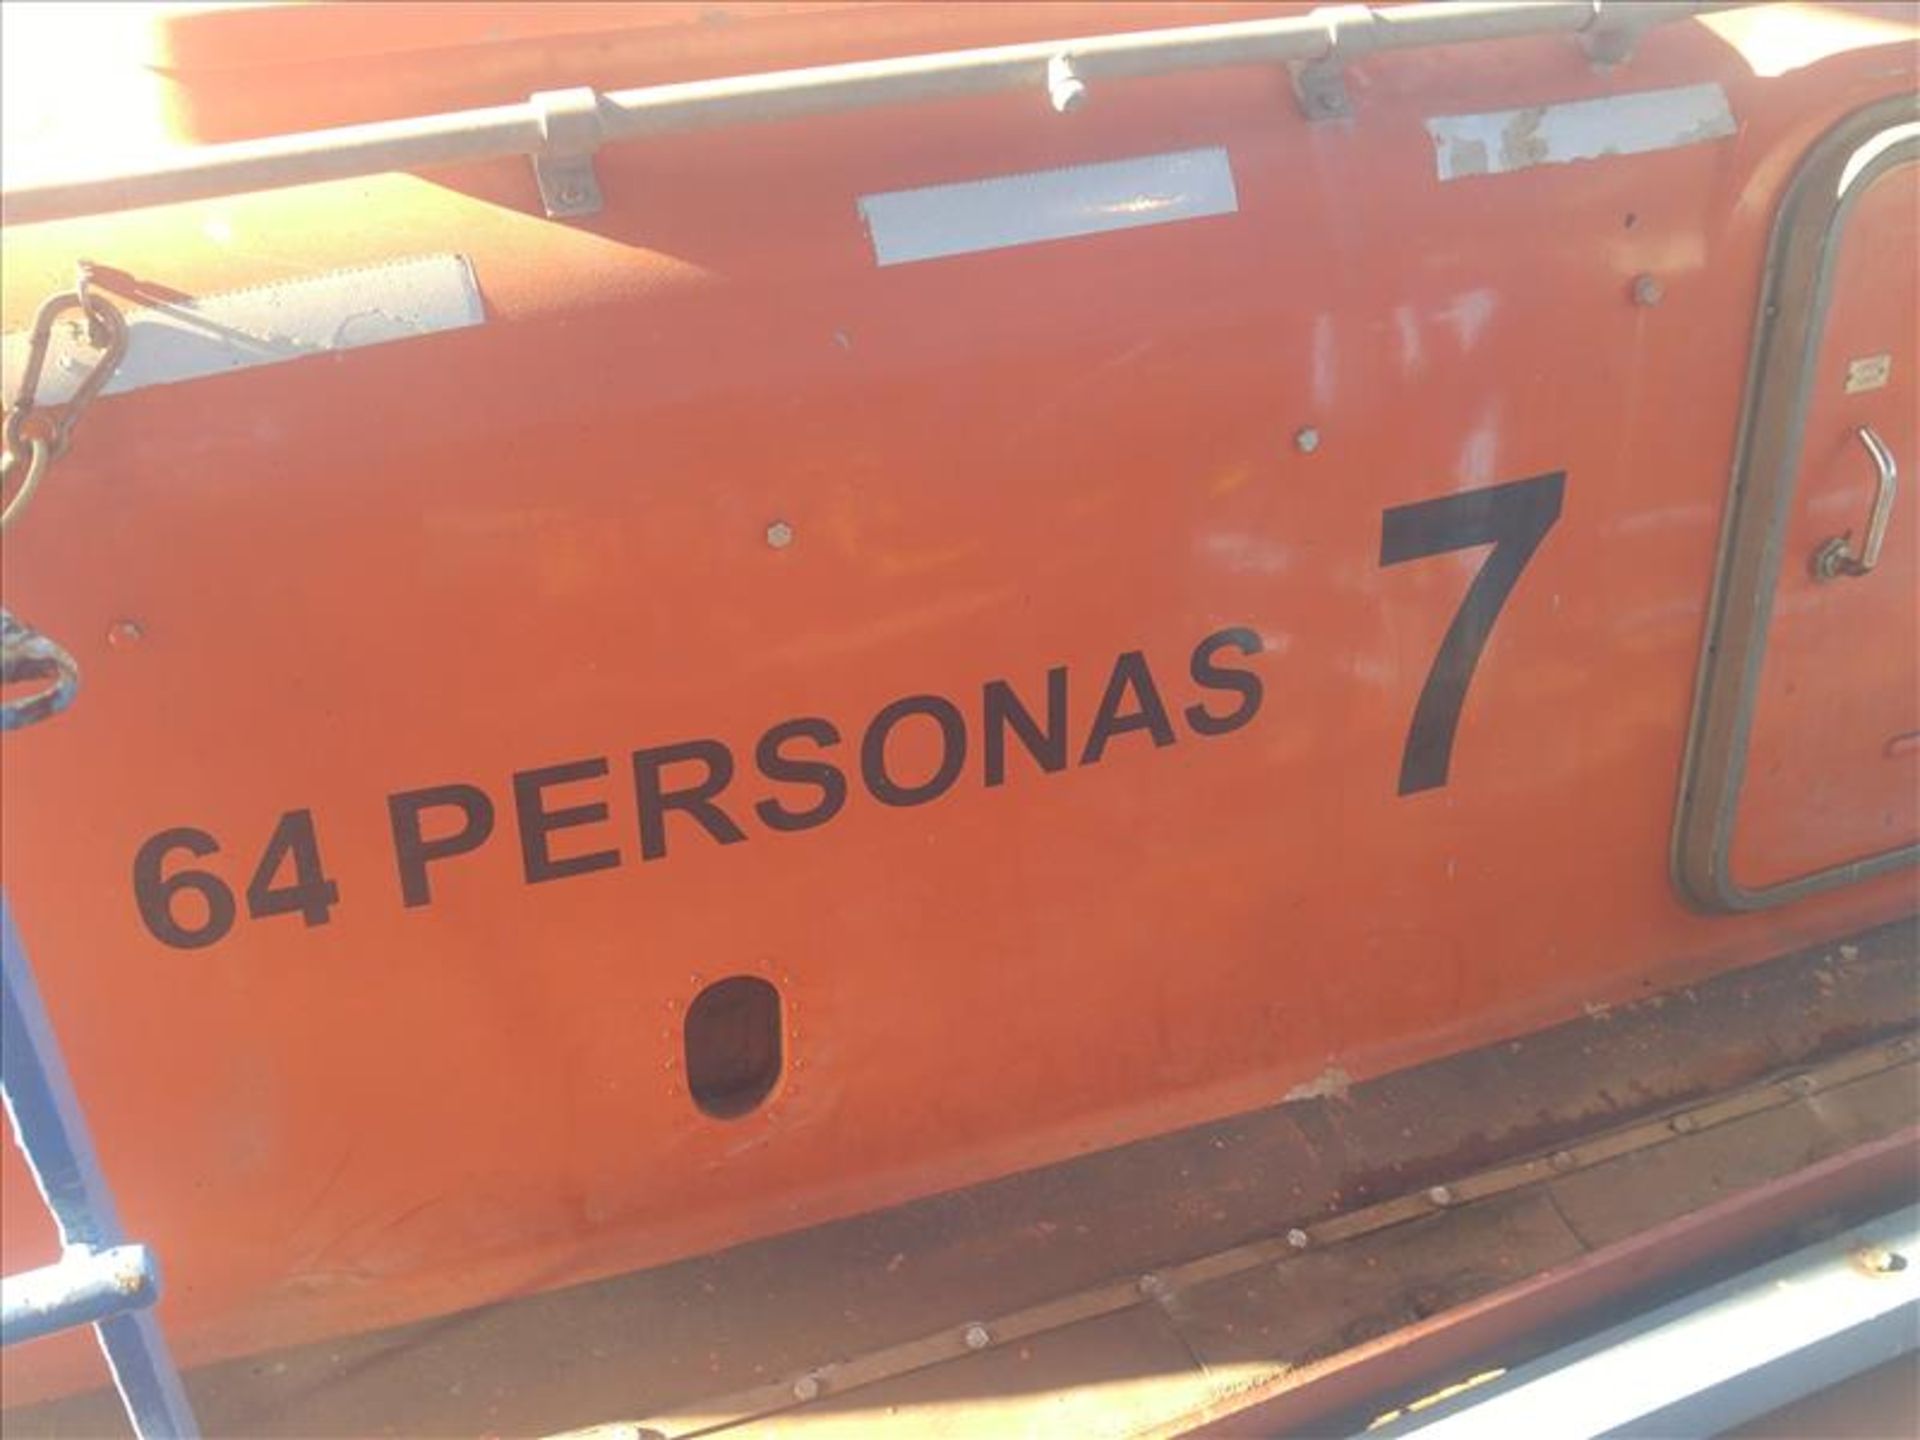 Harding 64 Person Lifeboat, No. of Pers.: 64, Material: G.R.P, L: 9.8, B: 3.3, D: 1.38, CUB: 33. - Image 3 of 17